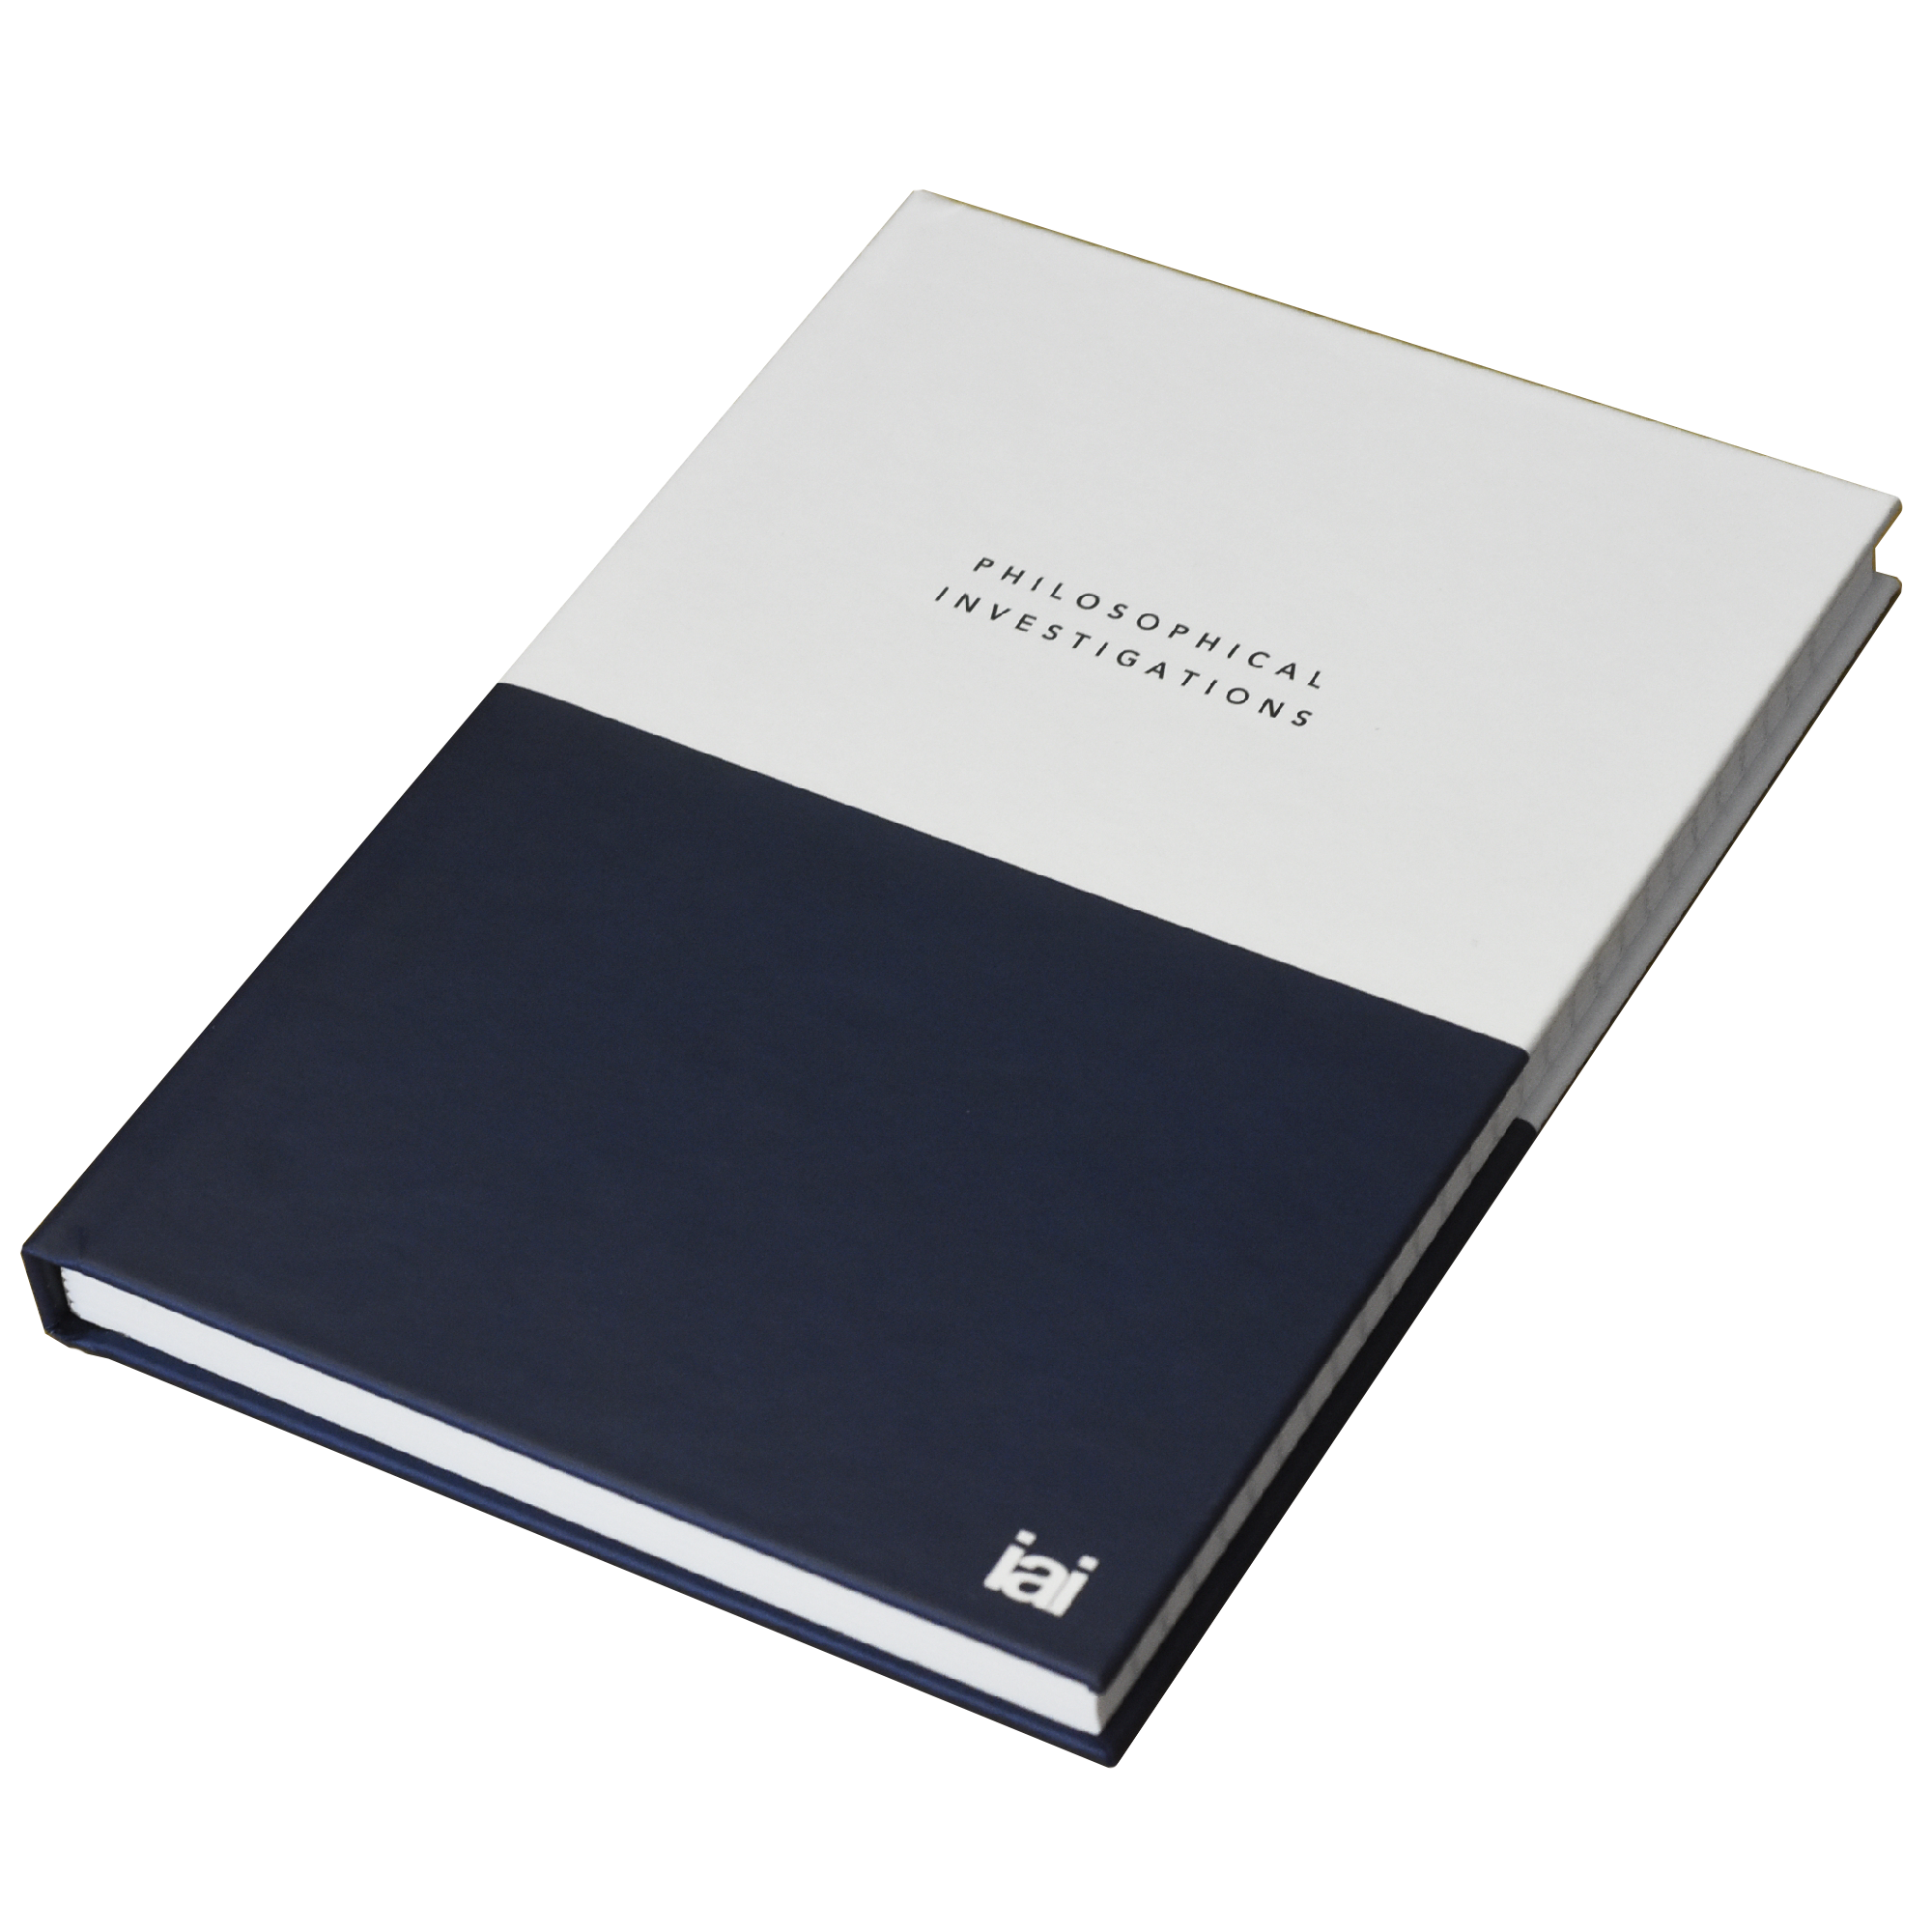 Philosophical Investigations Notebook